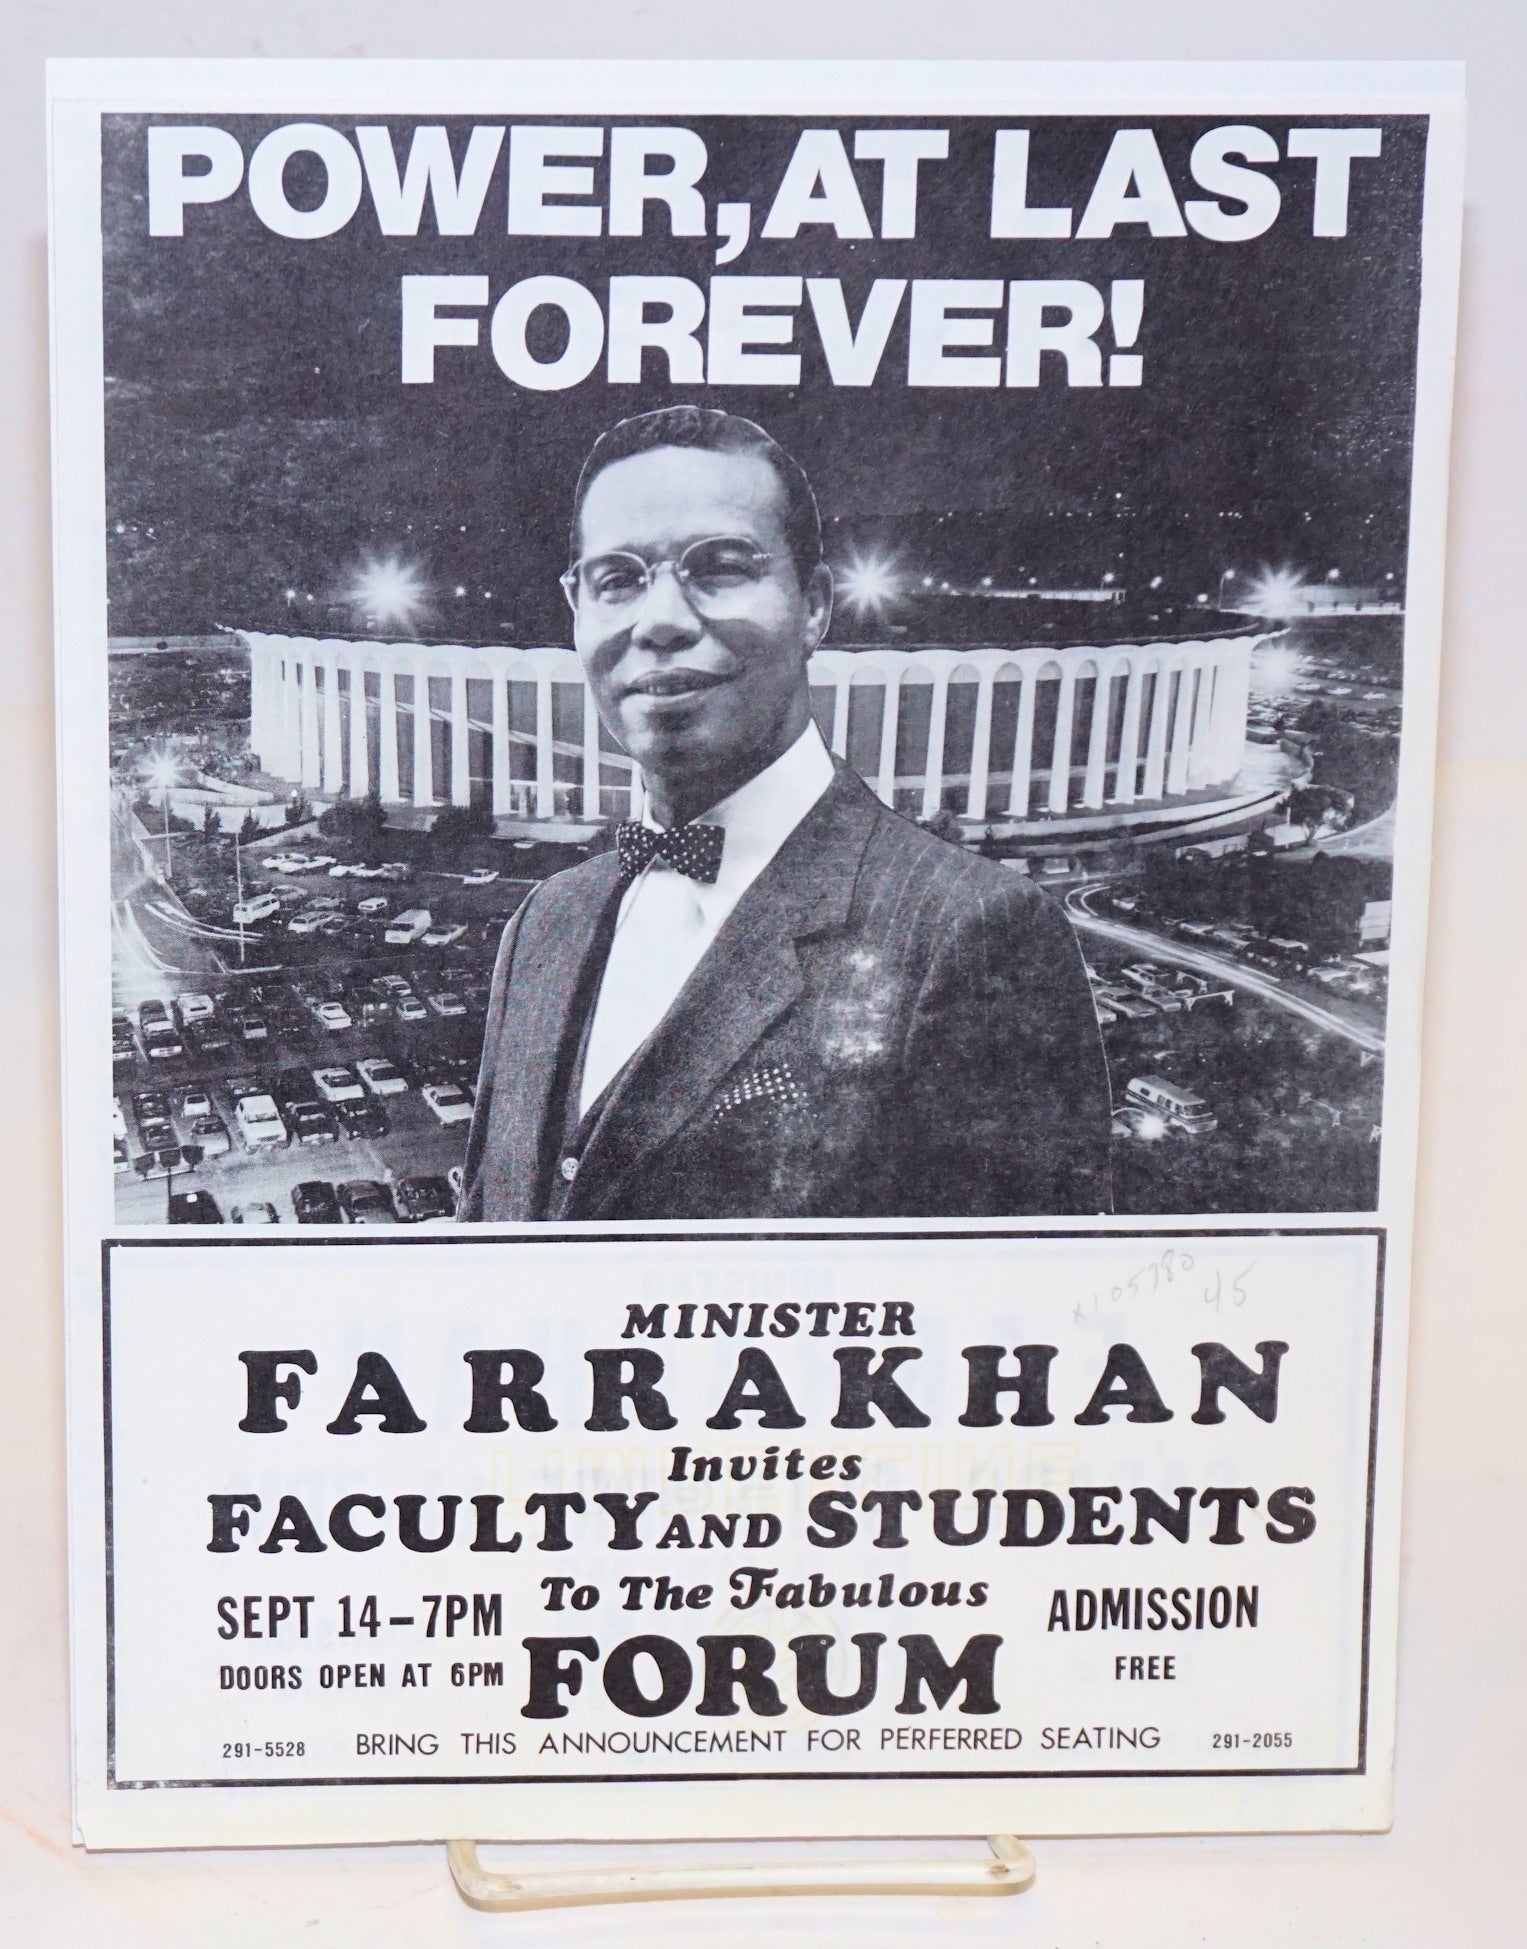 Power, at last forever!/Poder al fin para siempre; Minister Farrakhan invites faculty and students to the fabulous Forum, Sept 14- 7 pm, admission free